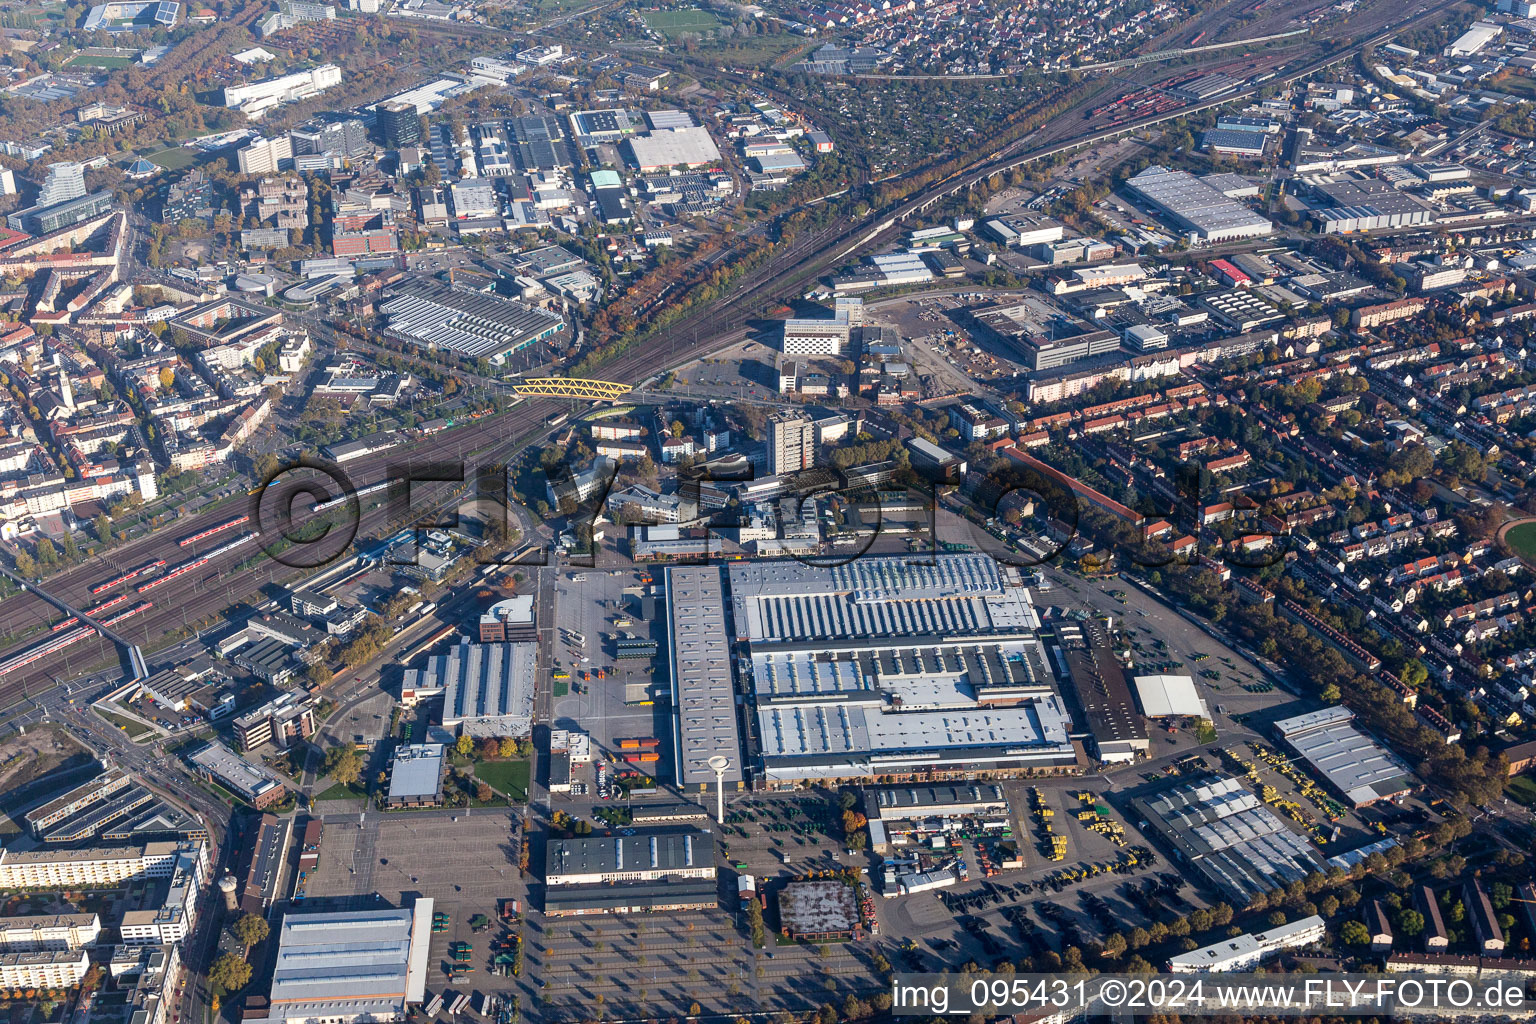 Aerial view of Plant site of the former factory Lanz (John Deere) in the district Lindenhof in Mannheim in the state Baden-Wurttemberg, Germany